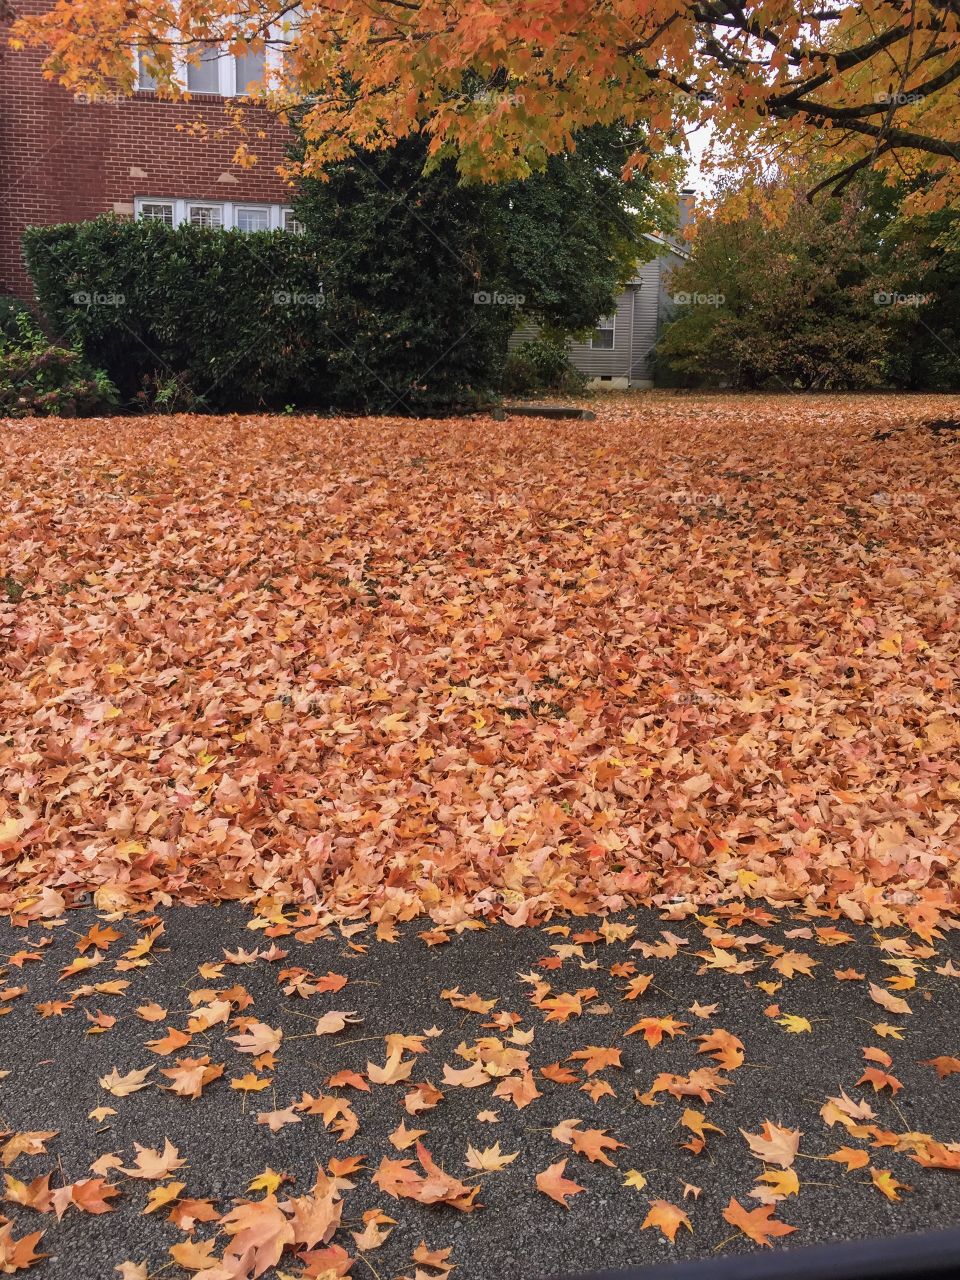 Piles of fall leaves